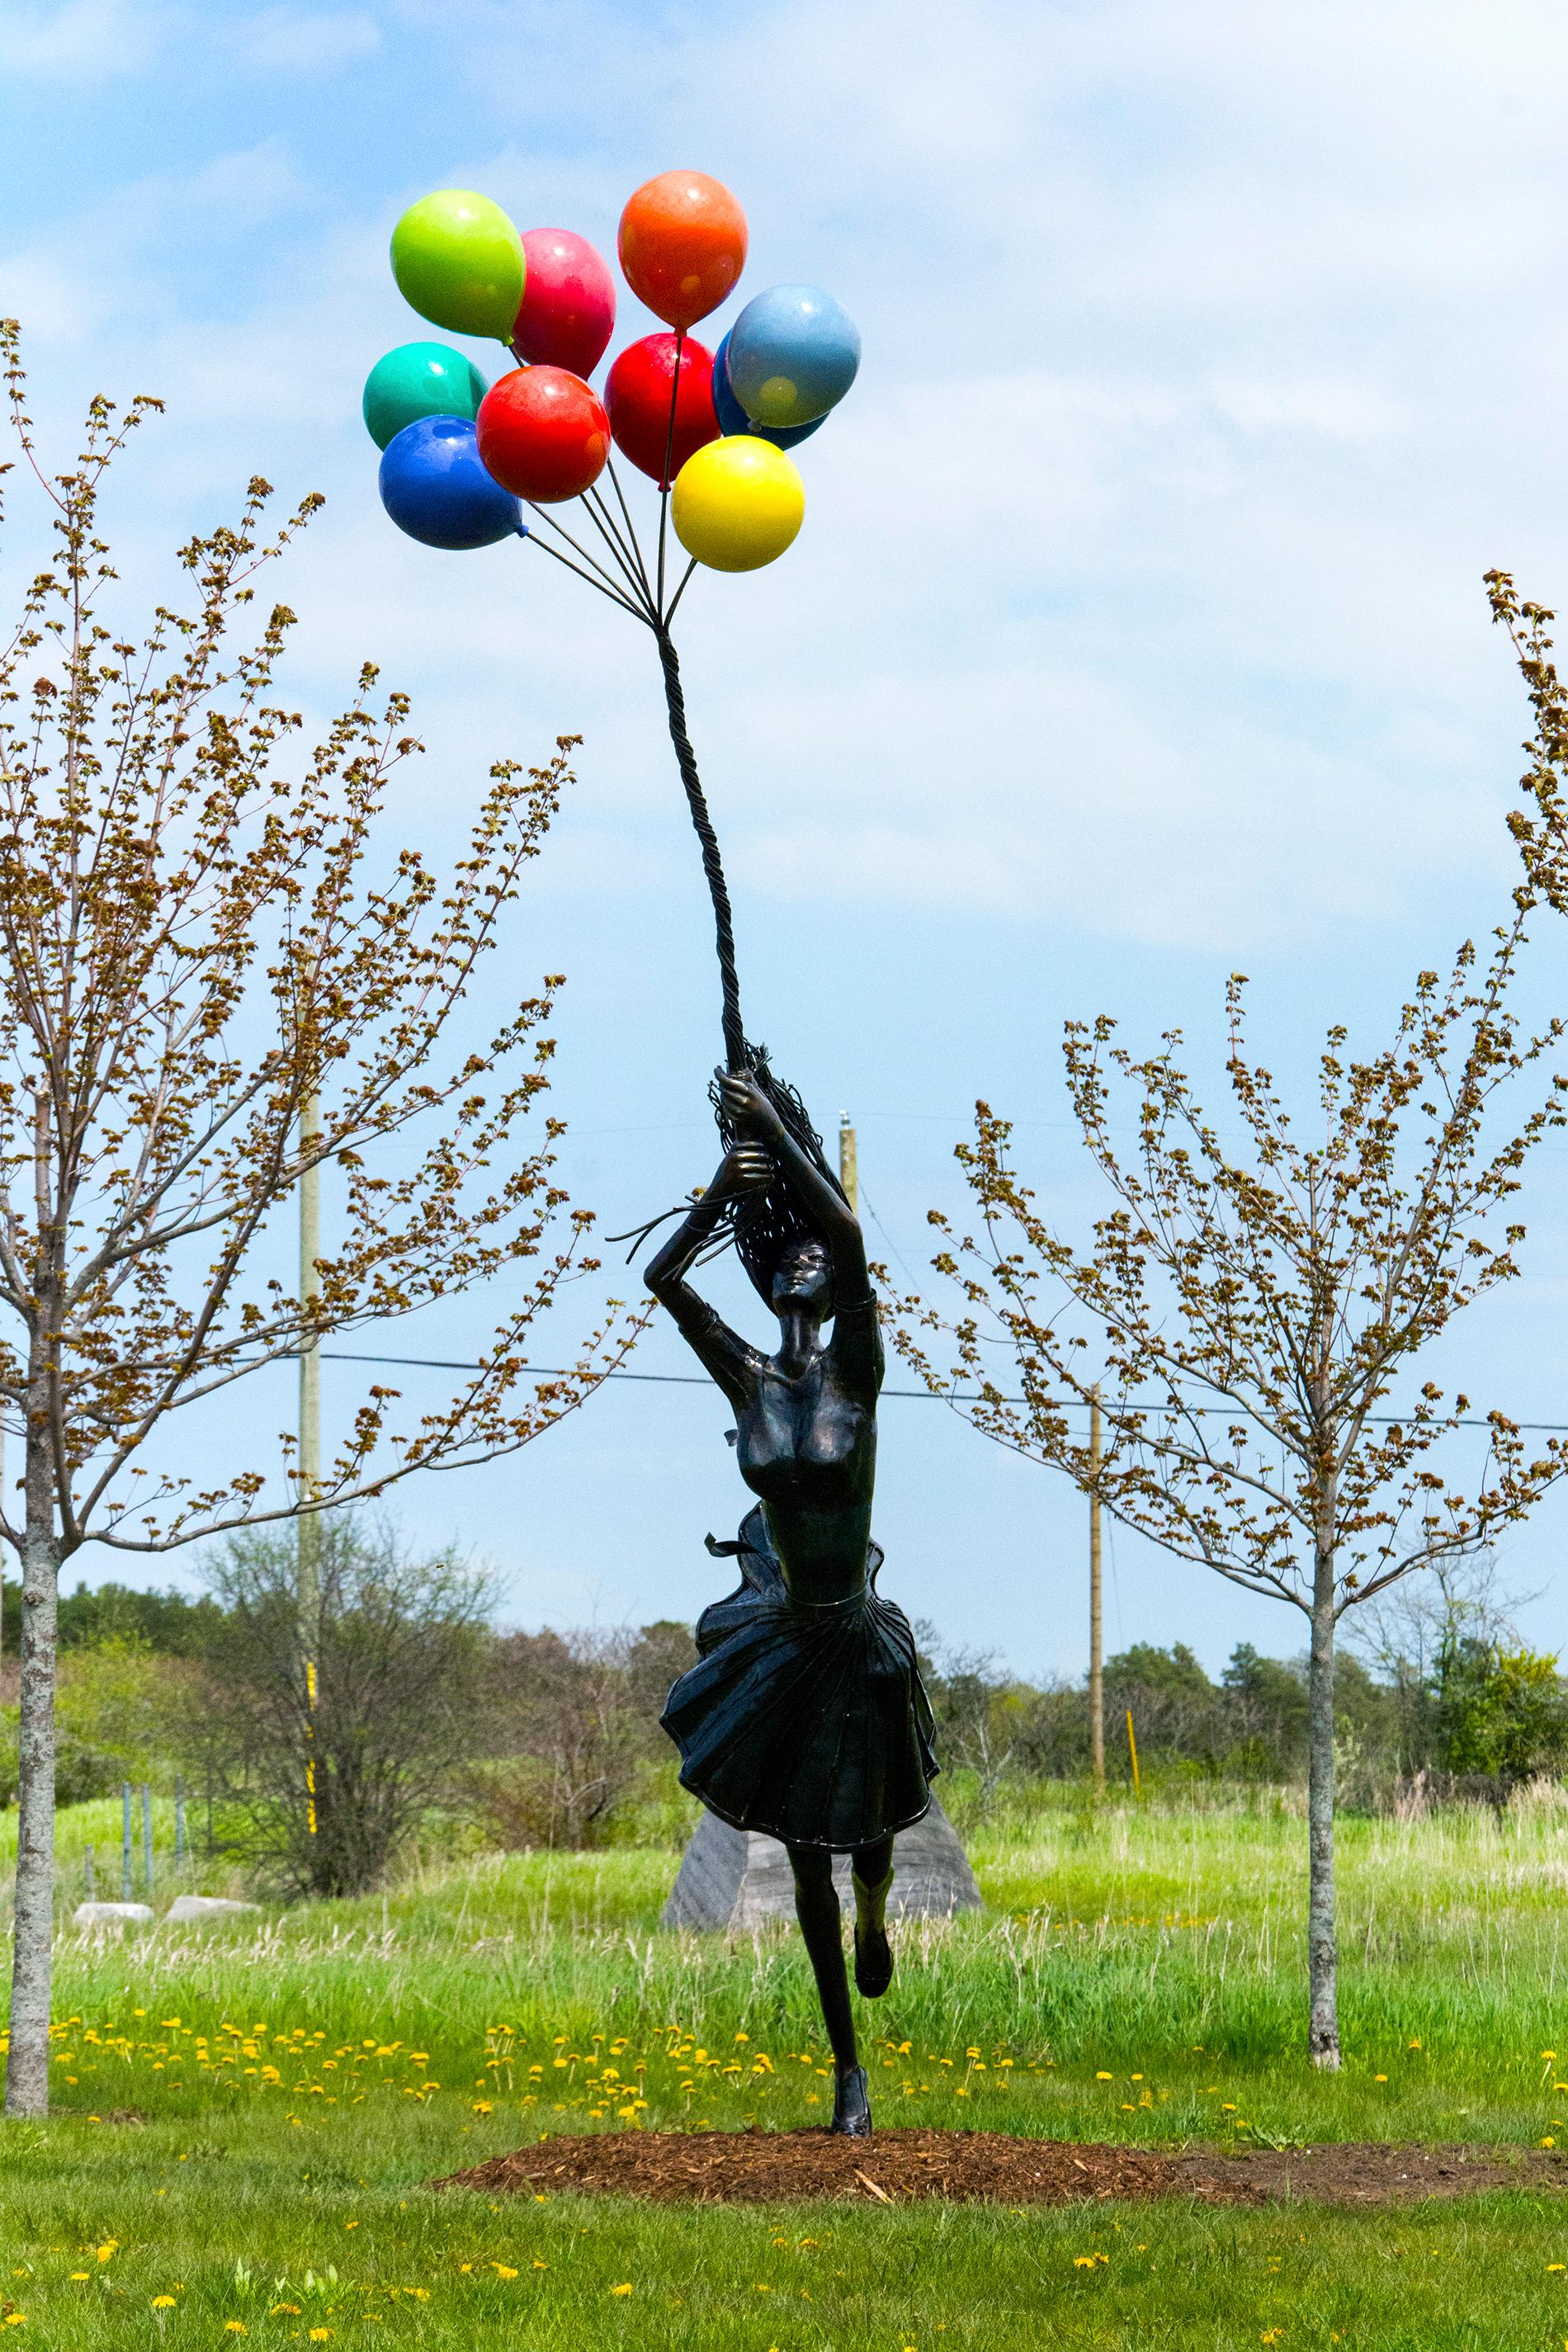 Rendered in fine detail, the figure of a young woman is carried upwards by colorful balloons in this provocative outdoor sculpture. Derya Ozparlak's sculpture bring various character types and identities  to life. Her sculptures portray the